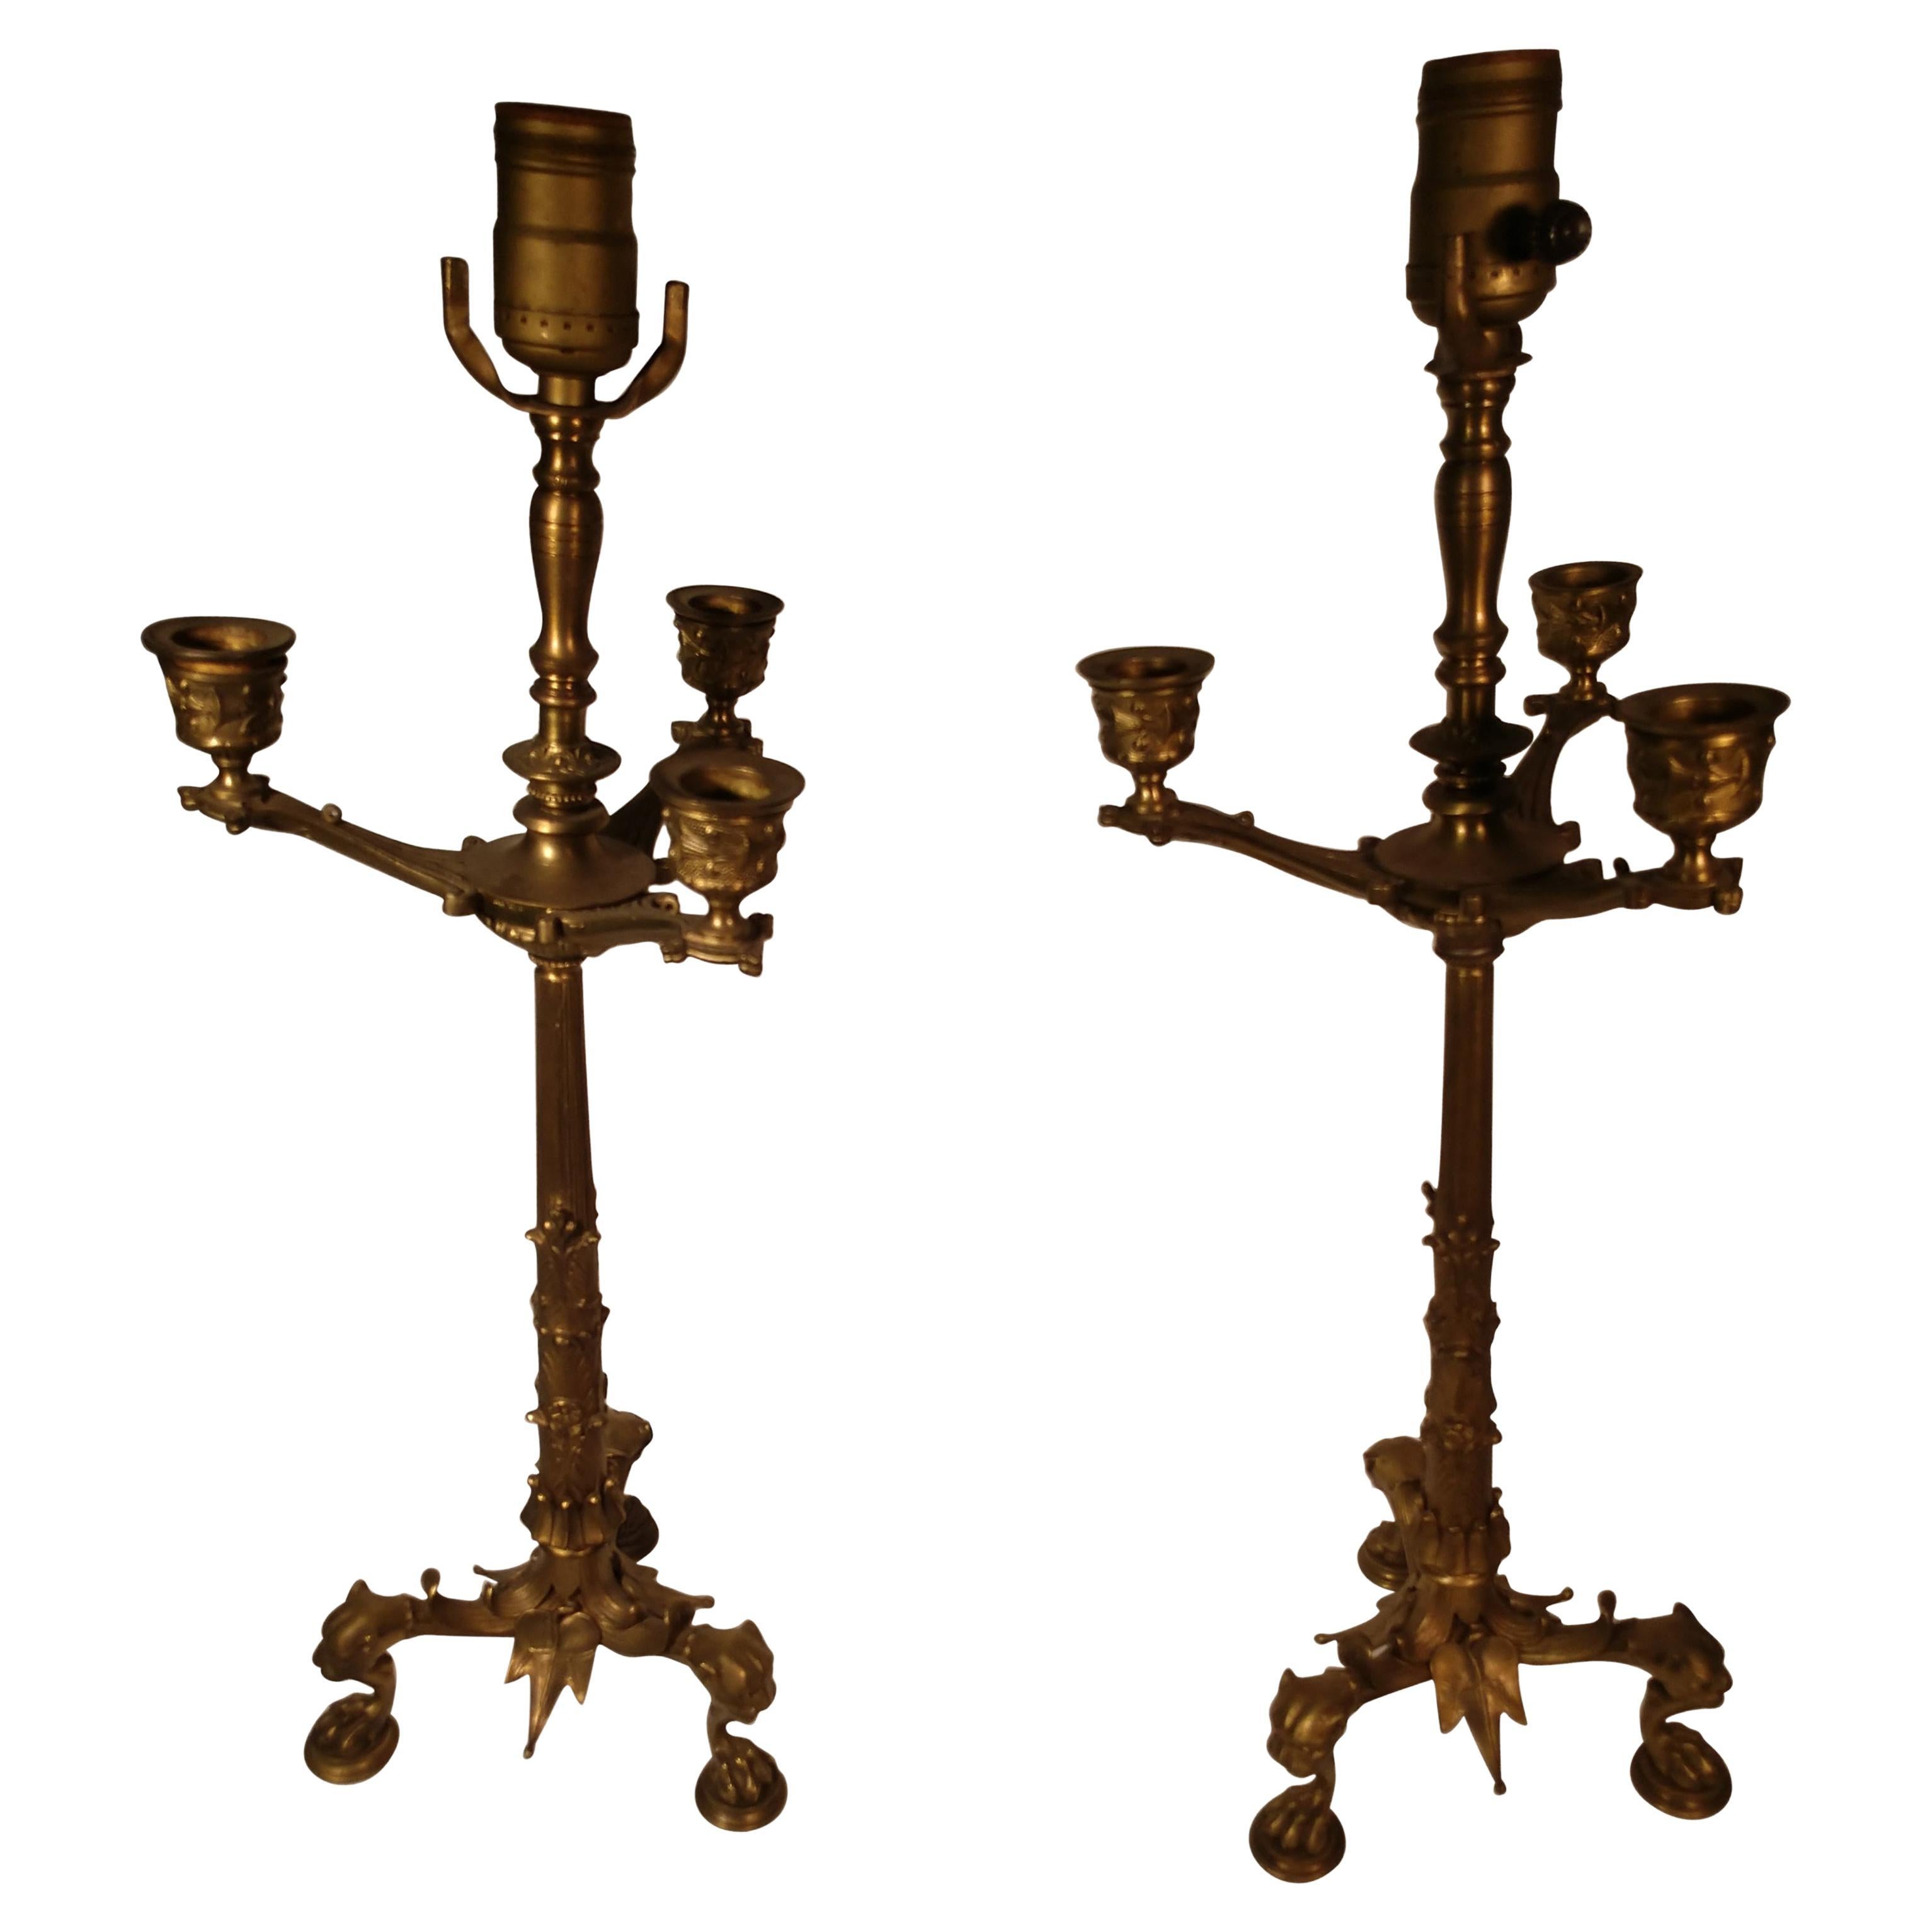 Beautiful pair of mid-19th century brass figural candlestick holders converted to electric. Lions heads featured, finely crafted, great castings.